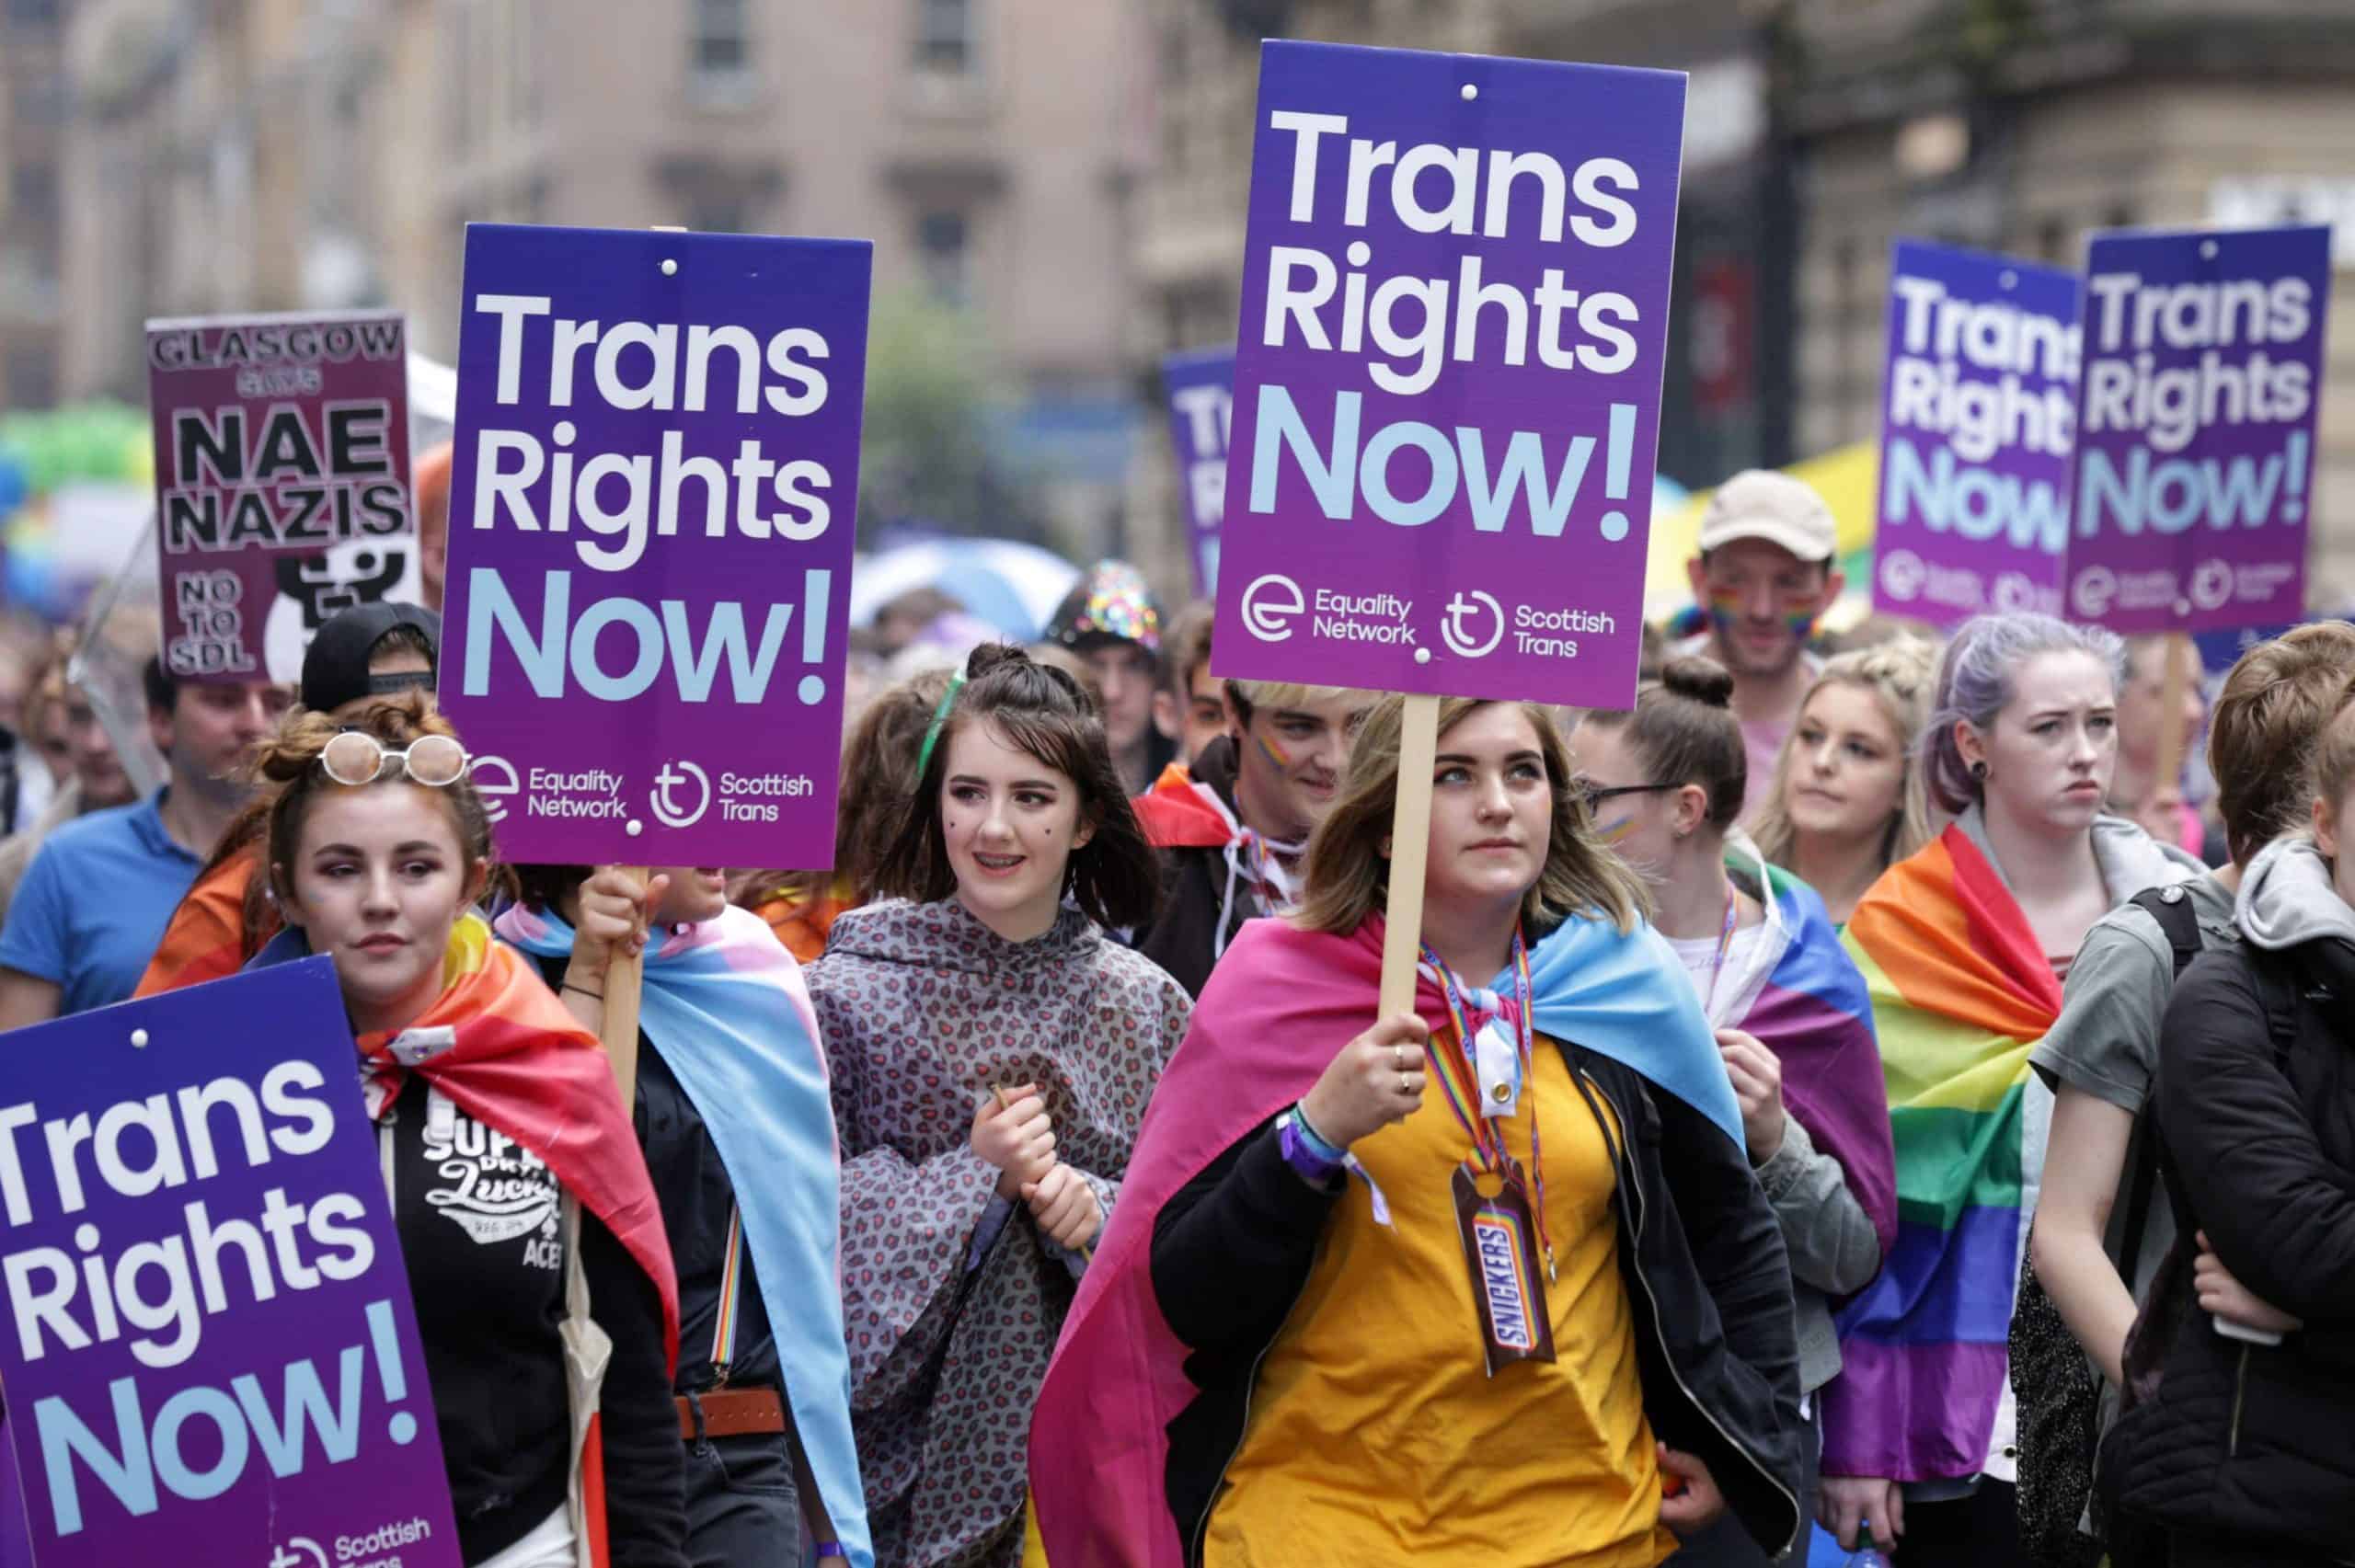 Anti-trans activist quoted by BBC calls for trans women to be executed